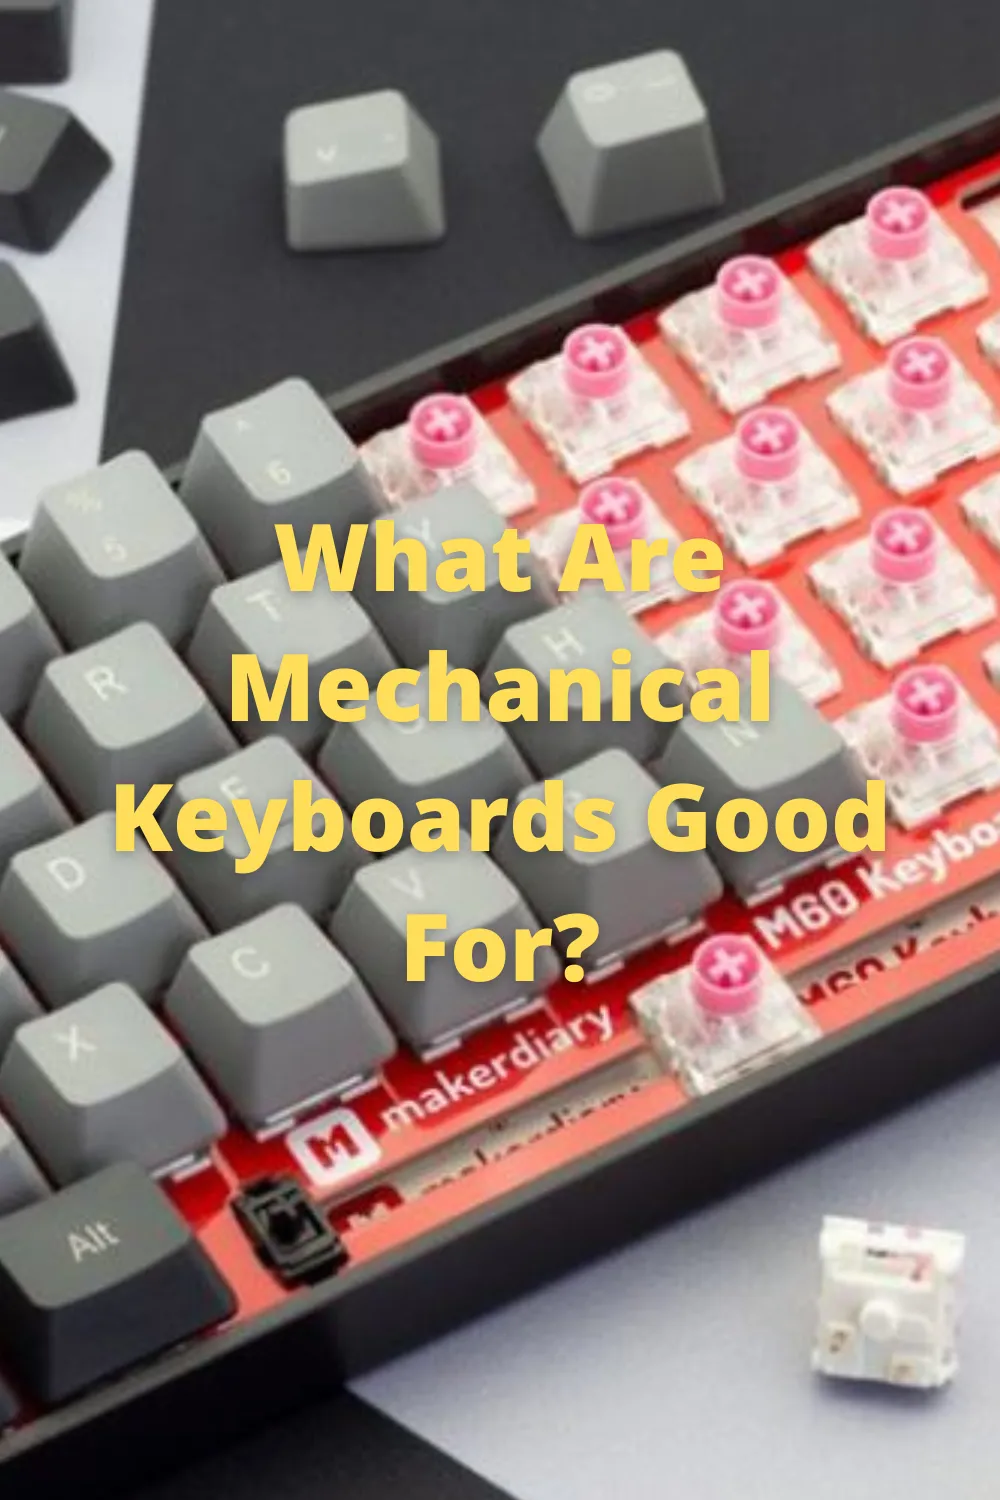 What Are Mechanical Keyboards Good For?